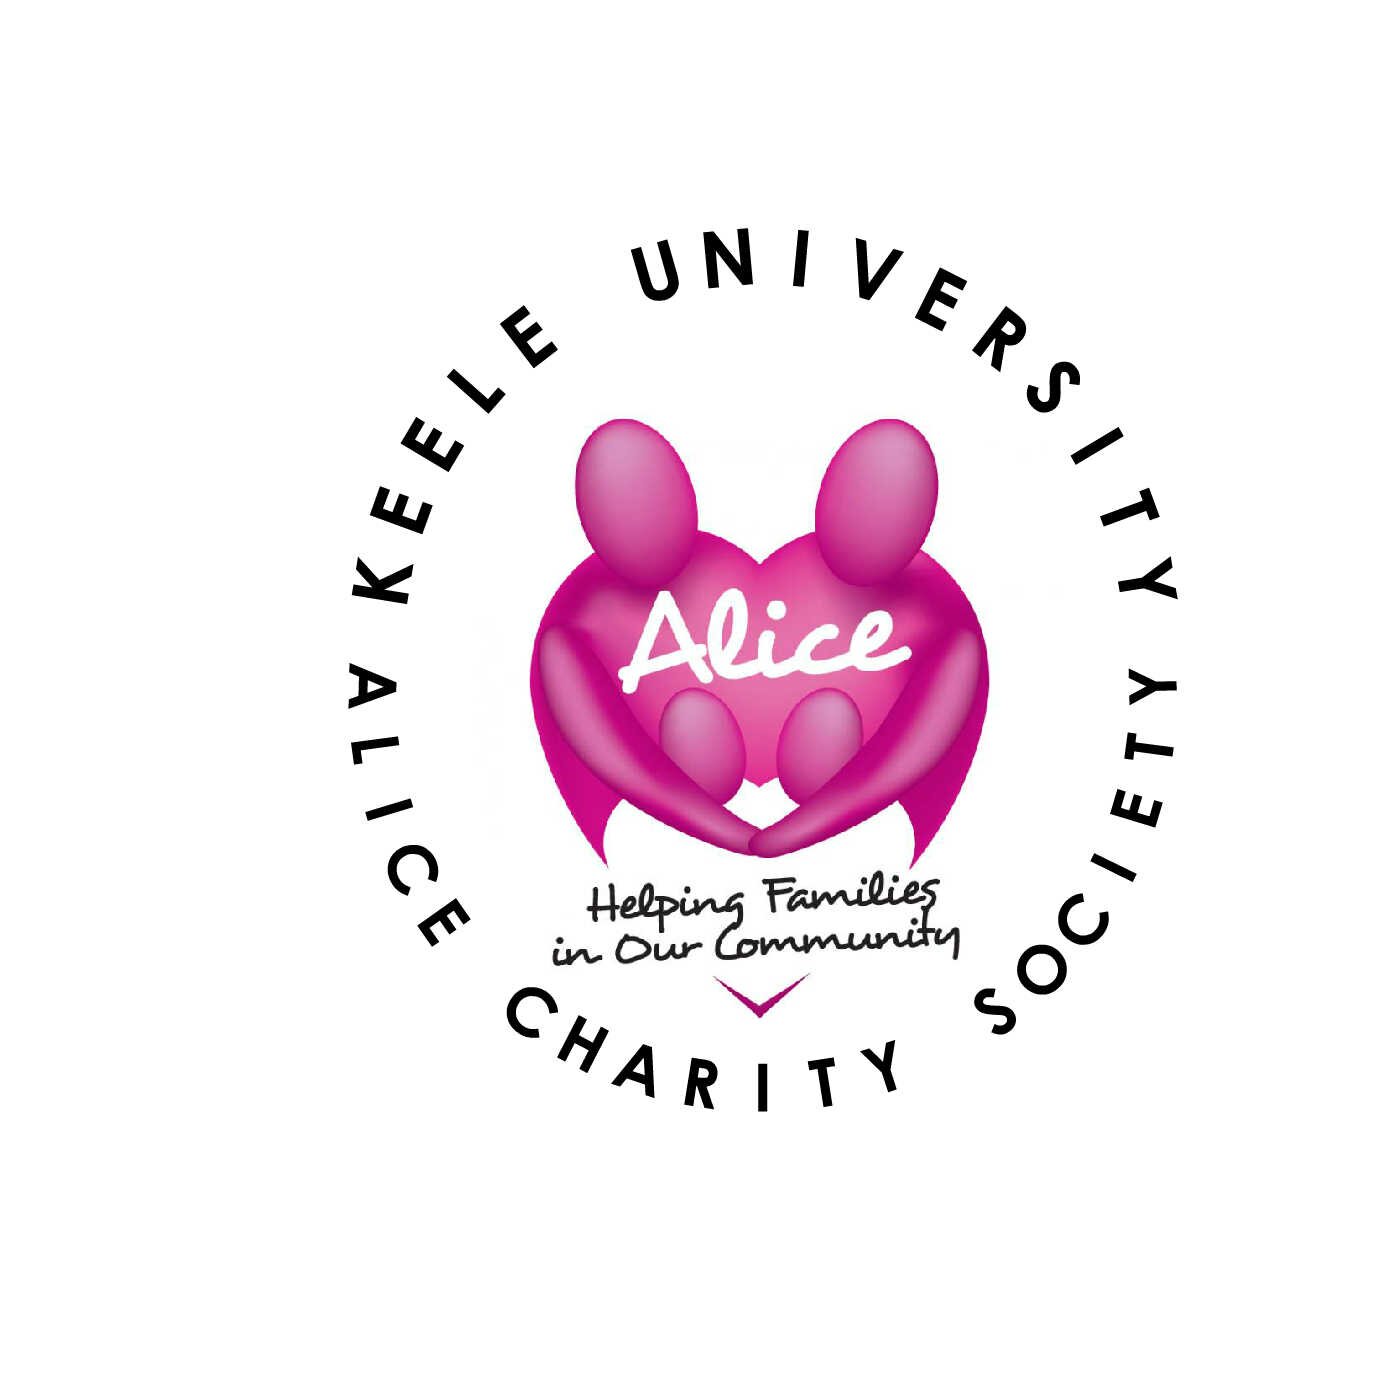 The official twitter for Keele University Alice Charity Society. We aim to fundraise, raise awareness, volunteer, and have fun.